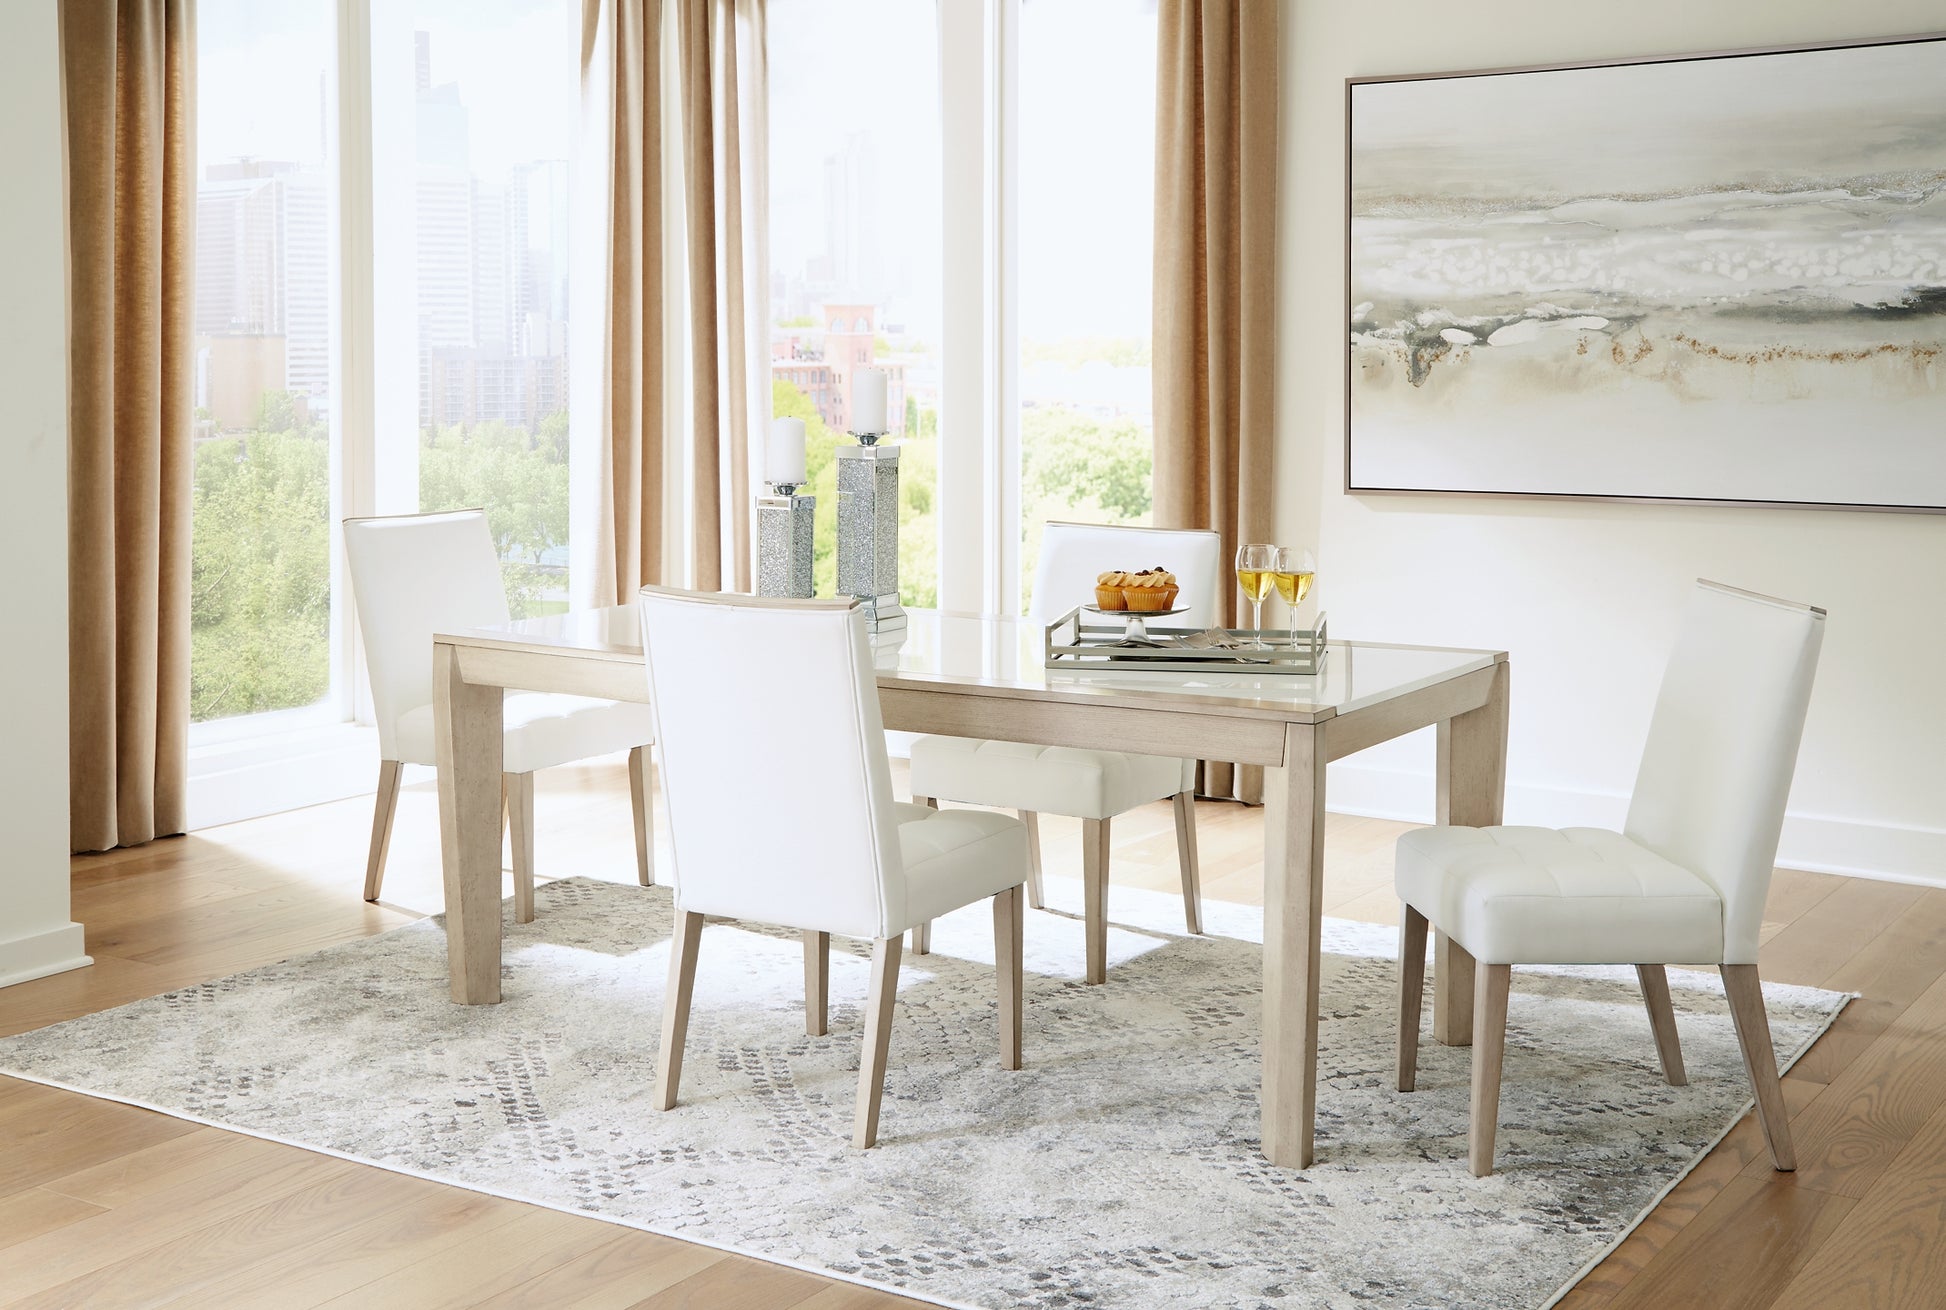 Wendora Dining Table and 4 Chairs JB's Furniture  Home Furniture, Home Decor, Furniture Store